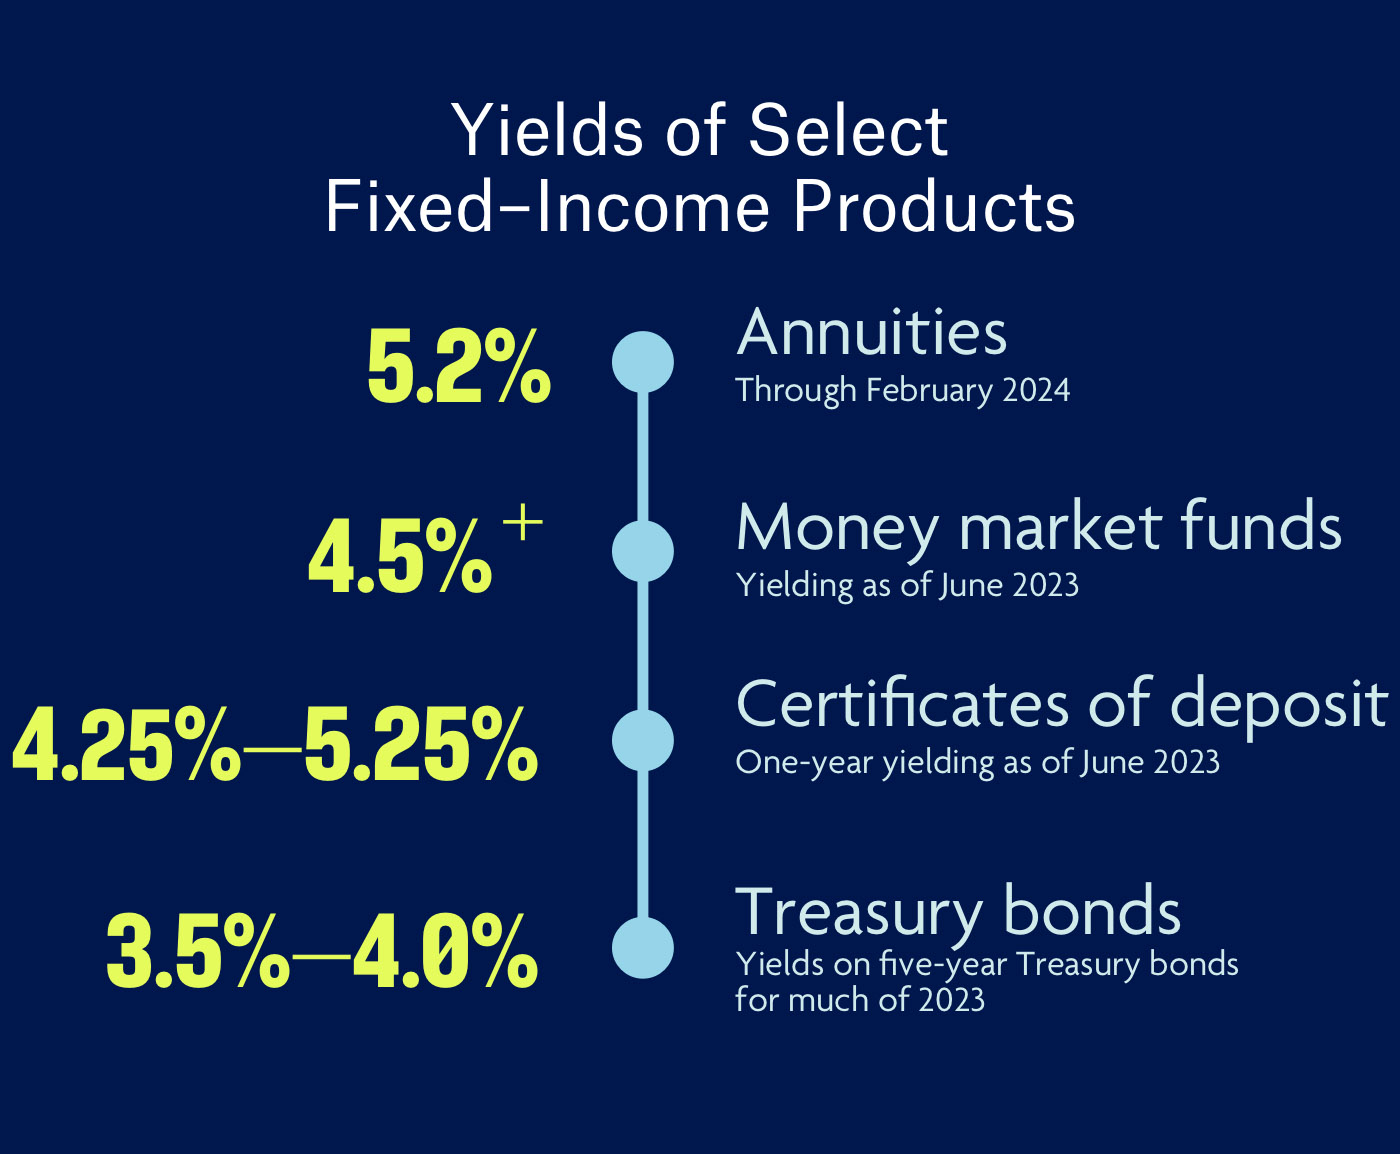 Yields of Select Fixed-Income Products graphic